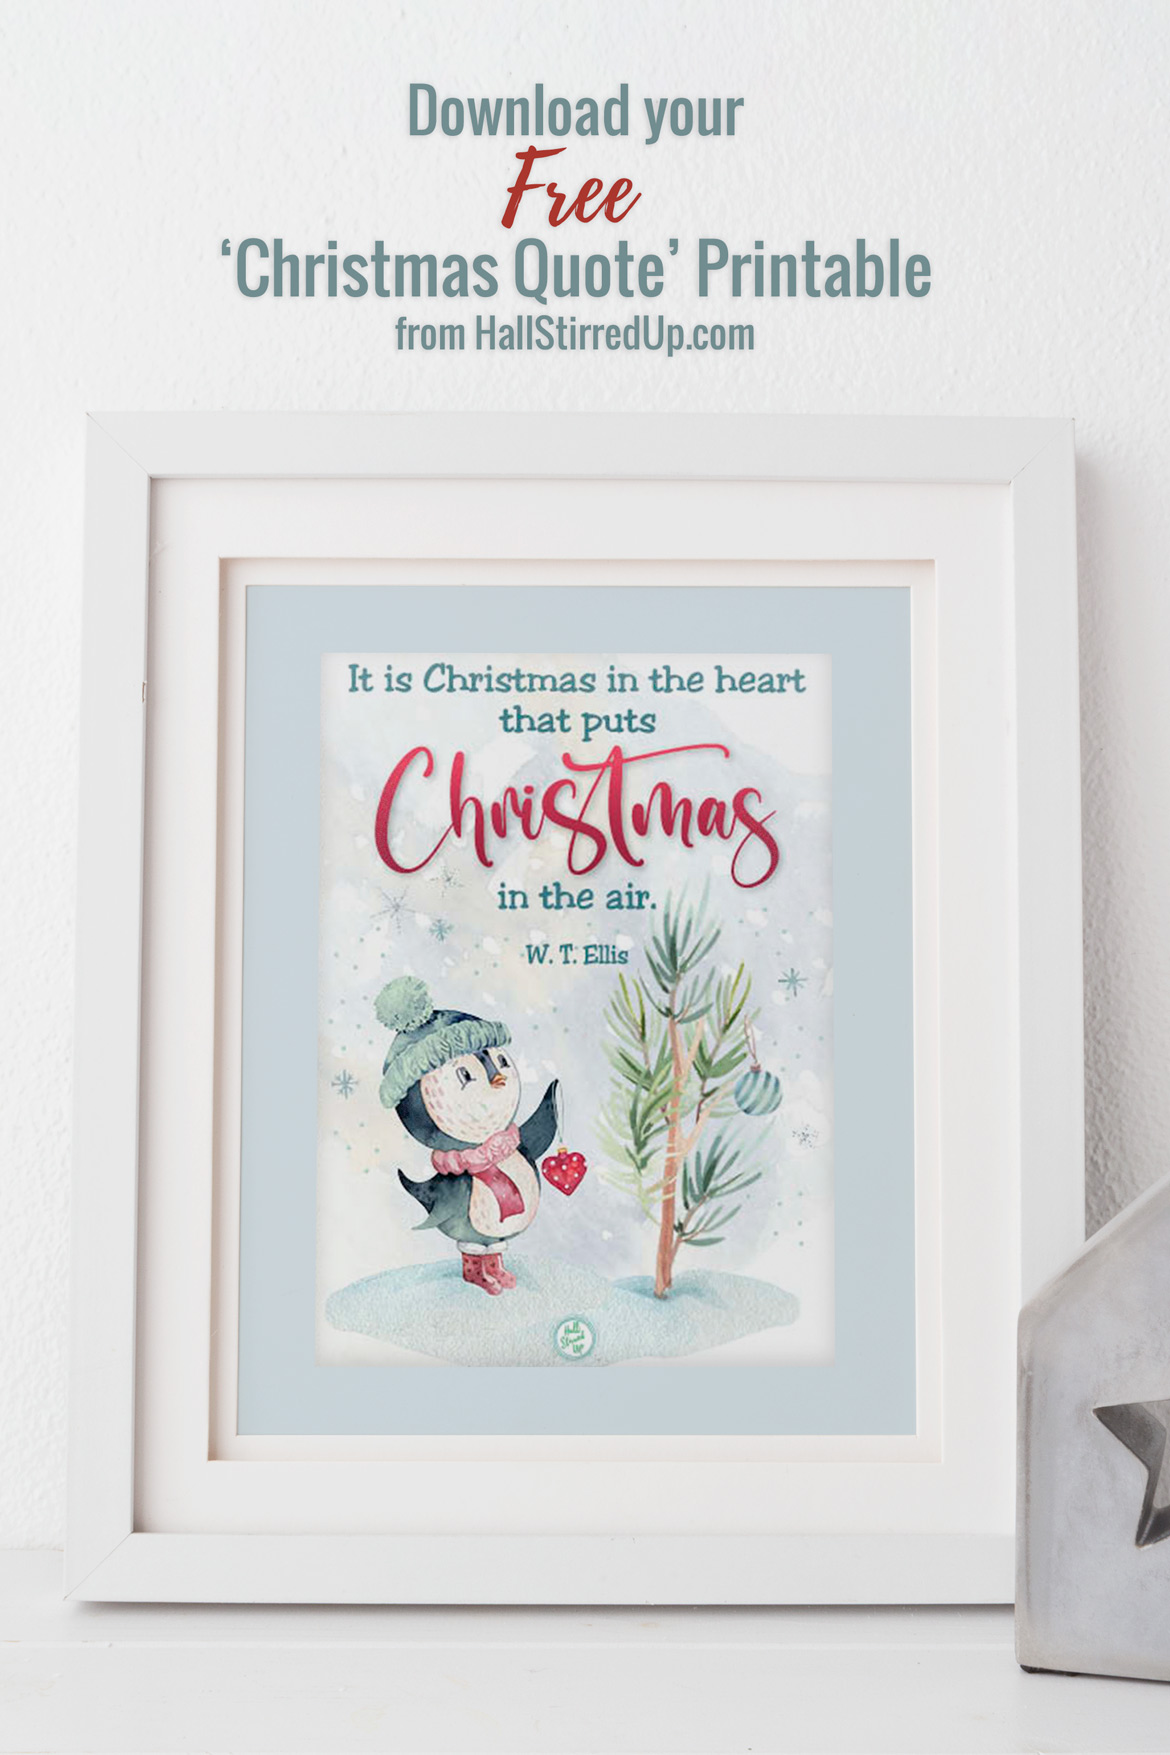 My favorite Christmas quotes and a pretty new free printable